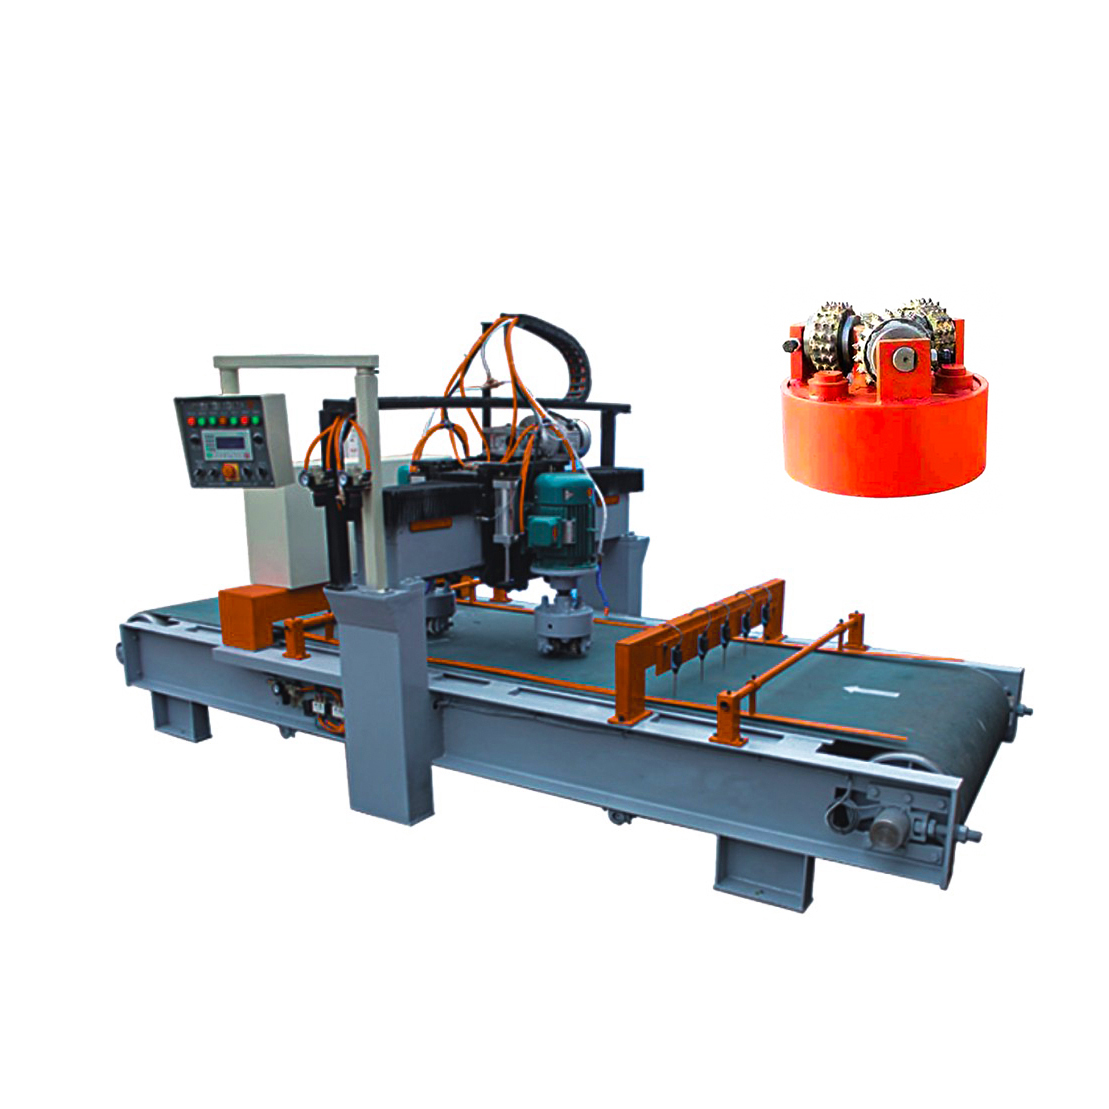 High Quality Full-Automatic Stone Surface Bush Hammer Machine - STONE BUSH HAMMER MACHINE – MACTOTEC